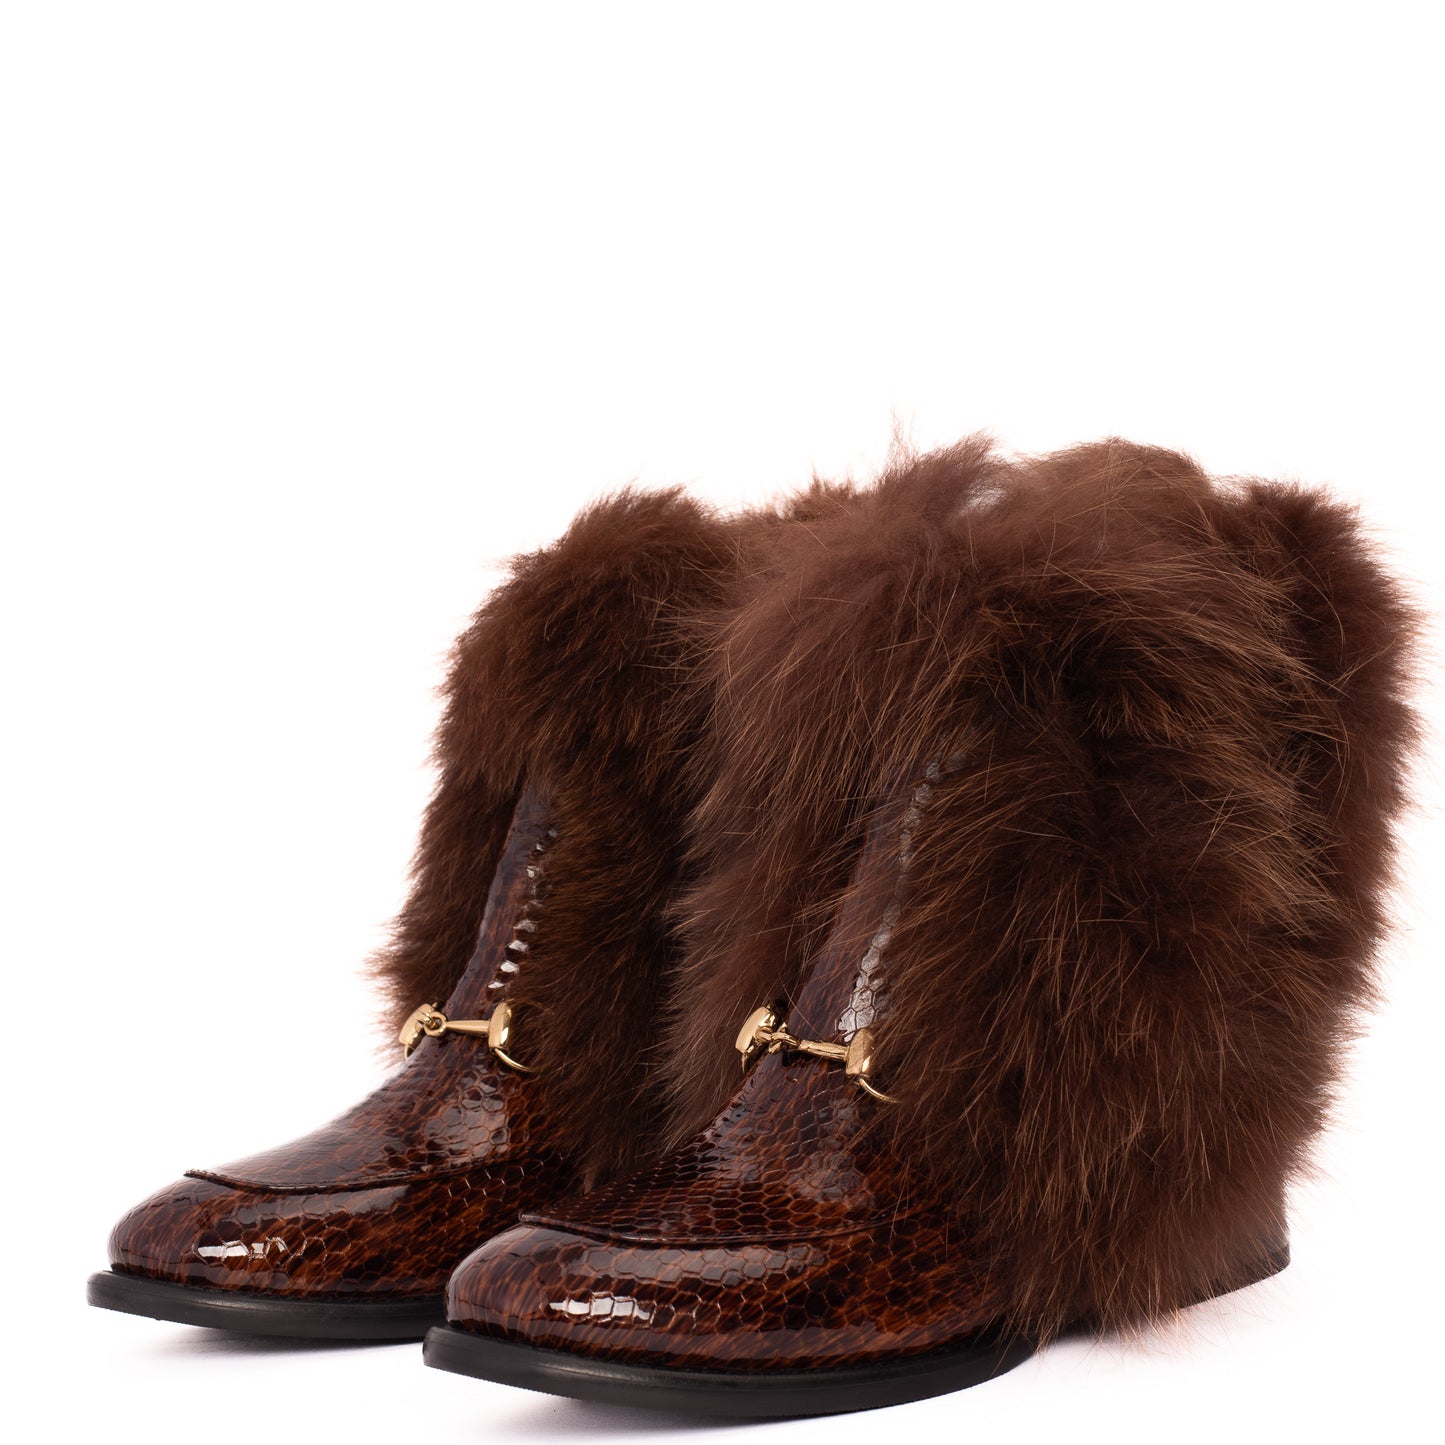 The Izmir Brown Patent Leather Natural Fur Mid Calf Women Boot